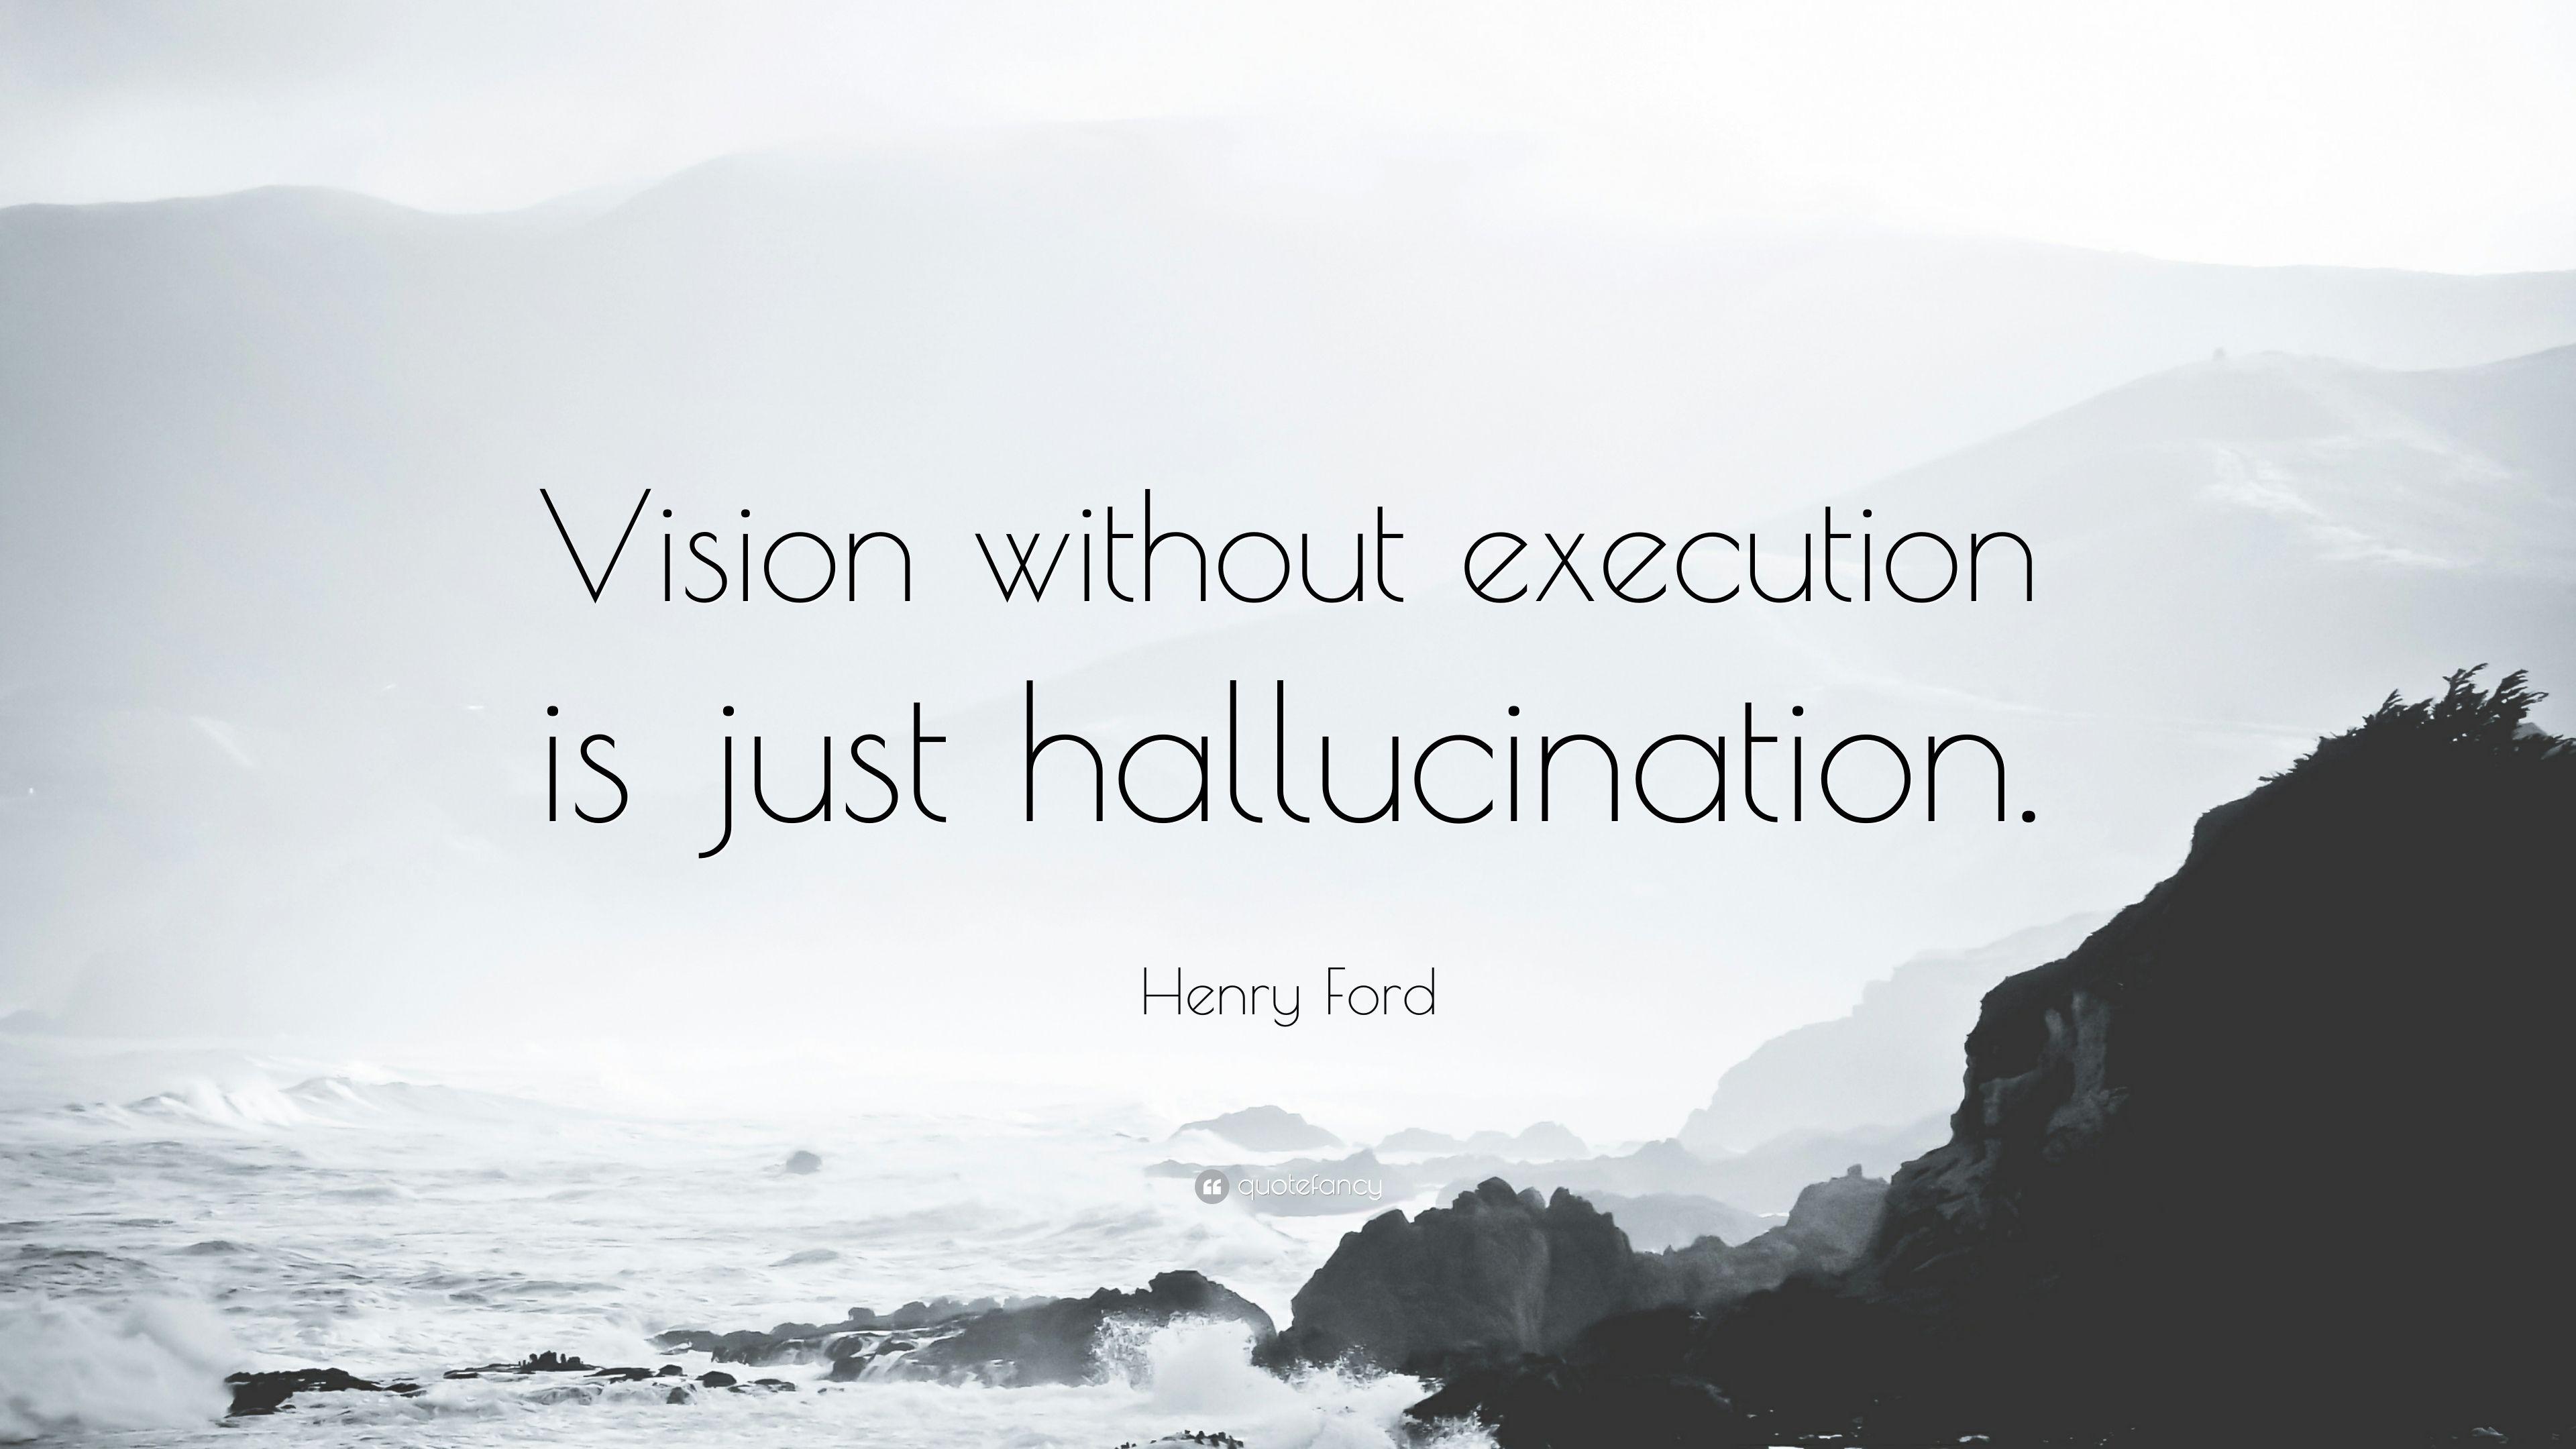 Henry Ford Quote: “Vision without execution is just hallucination